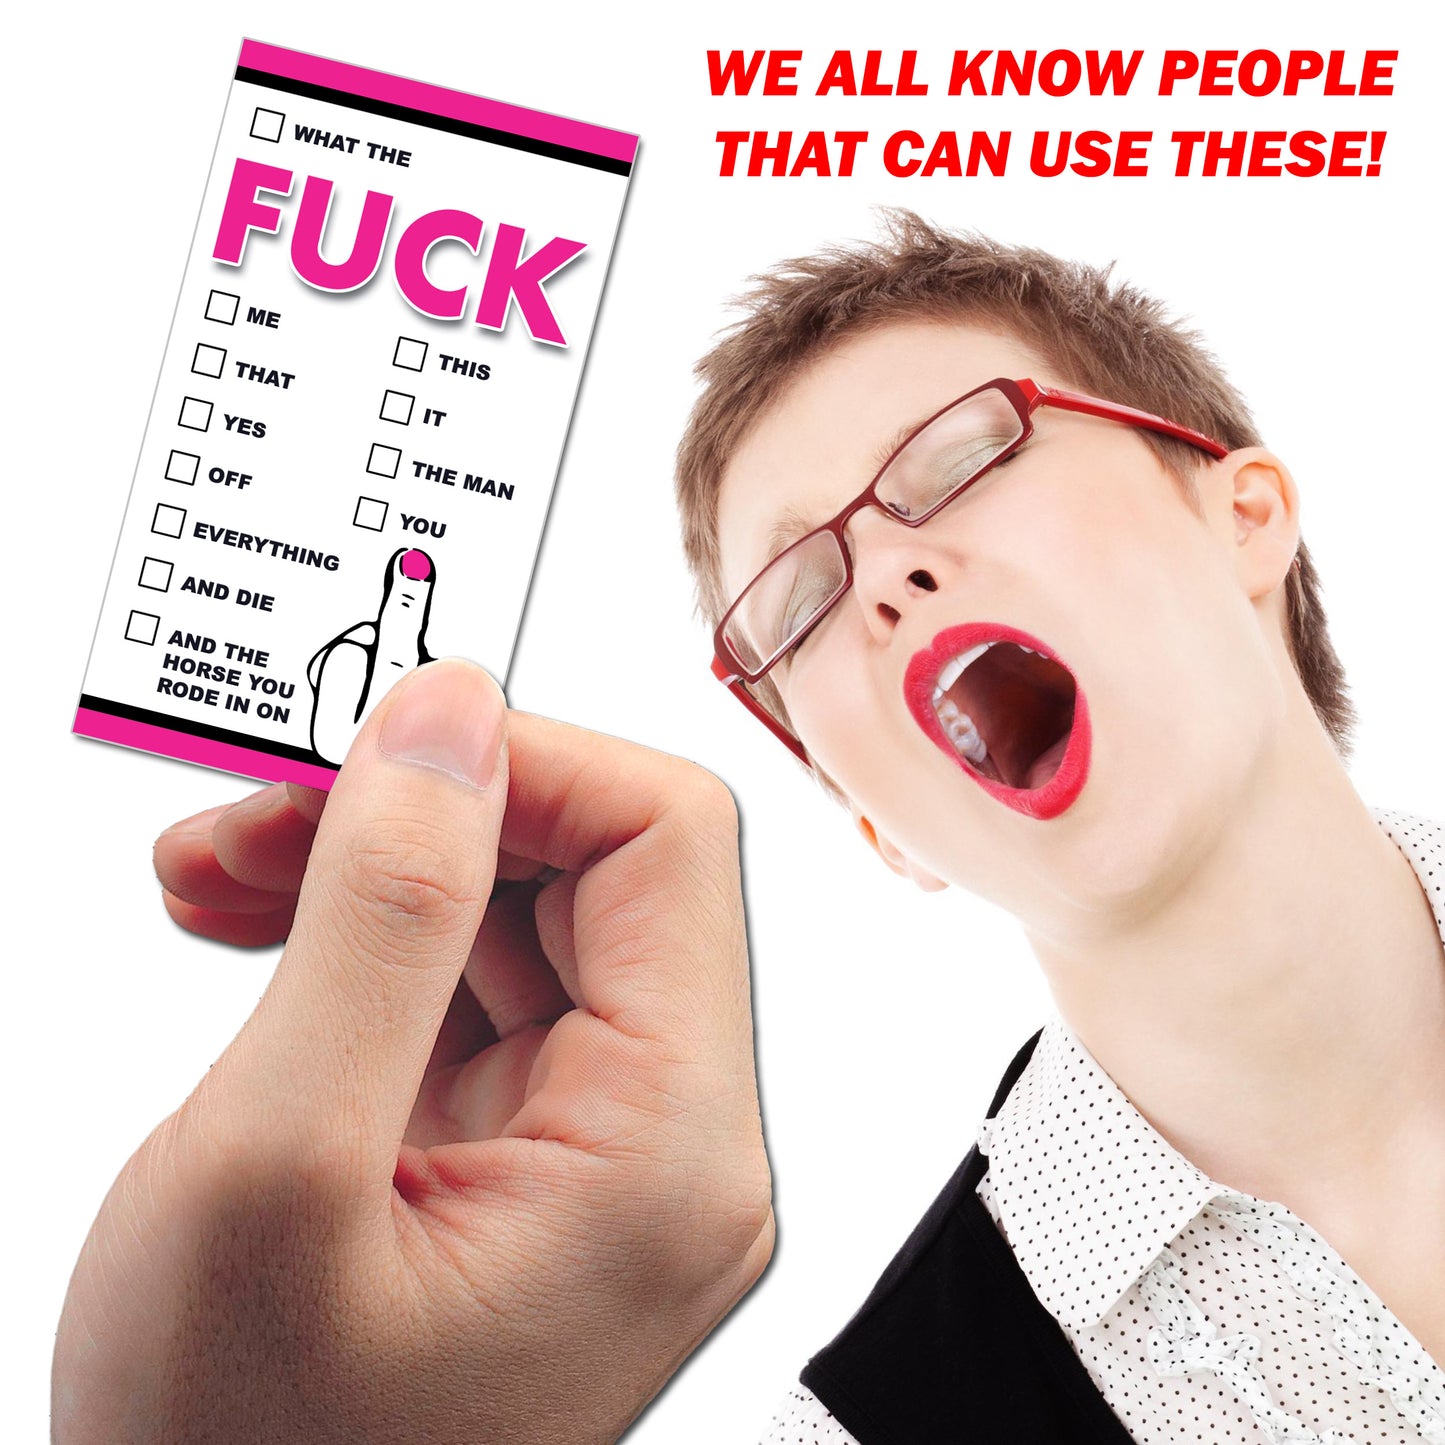 FUCK Cards – 50 Qty Business Cards, with Great Graphics on the Front, Blank Back, High Gloss, High Quality, Great Fun & FU Laughs!